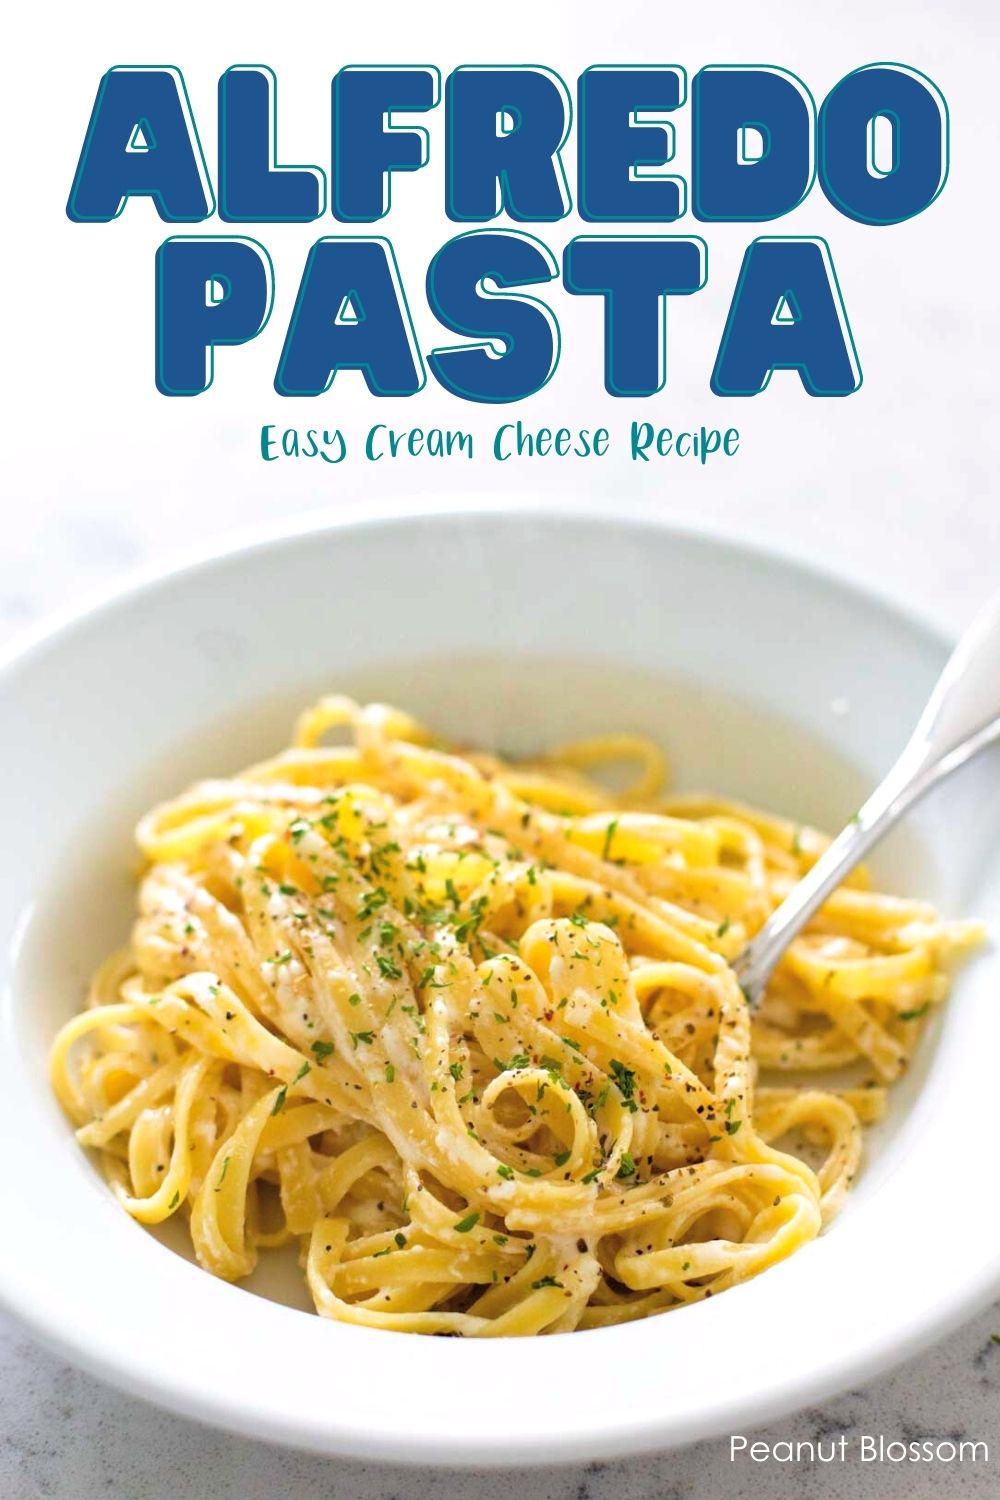 The finished bowl of pasta coated in Alfredo sauce has parsley sprinkled over the top.